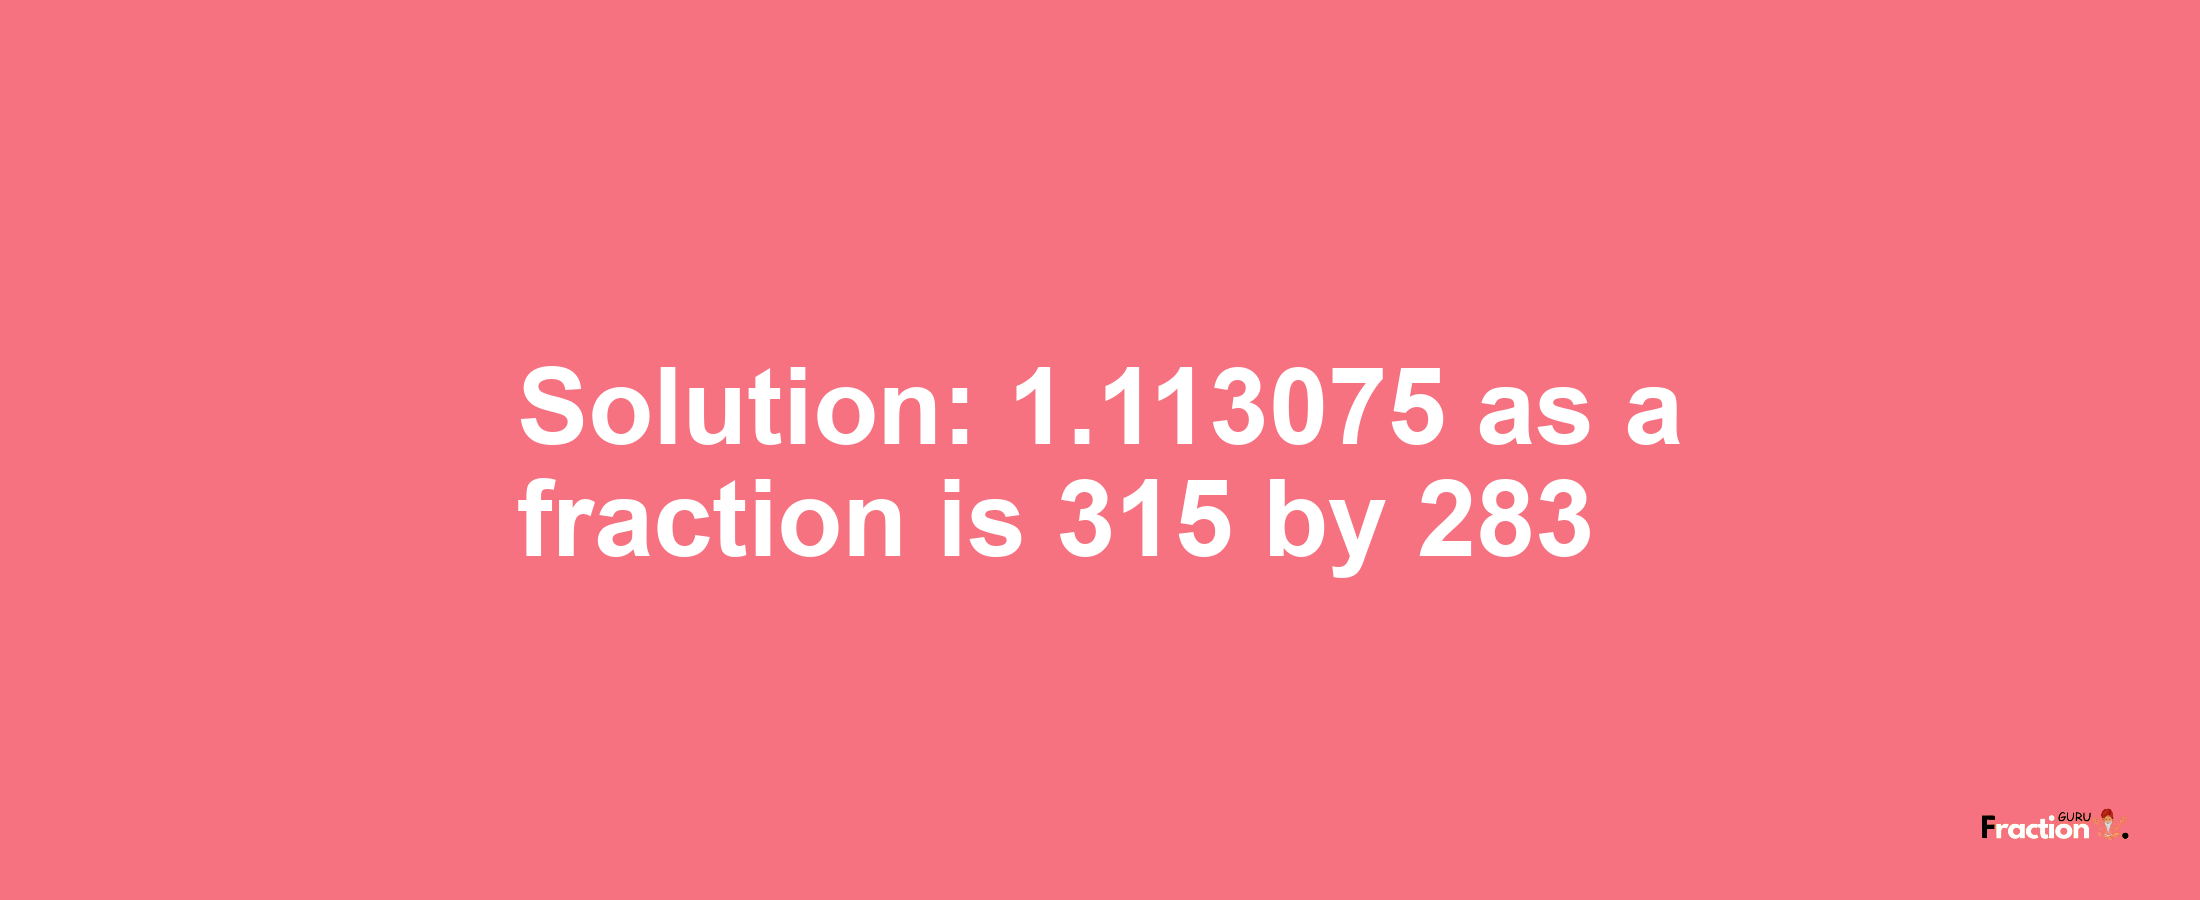 Solution:1.113075 as a fraction is 315/283